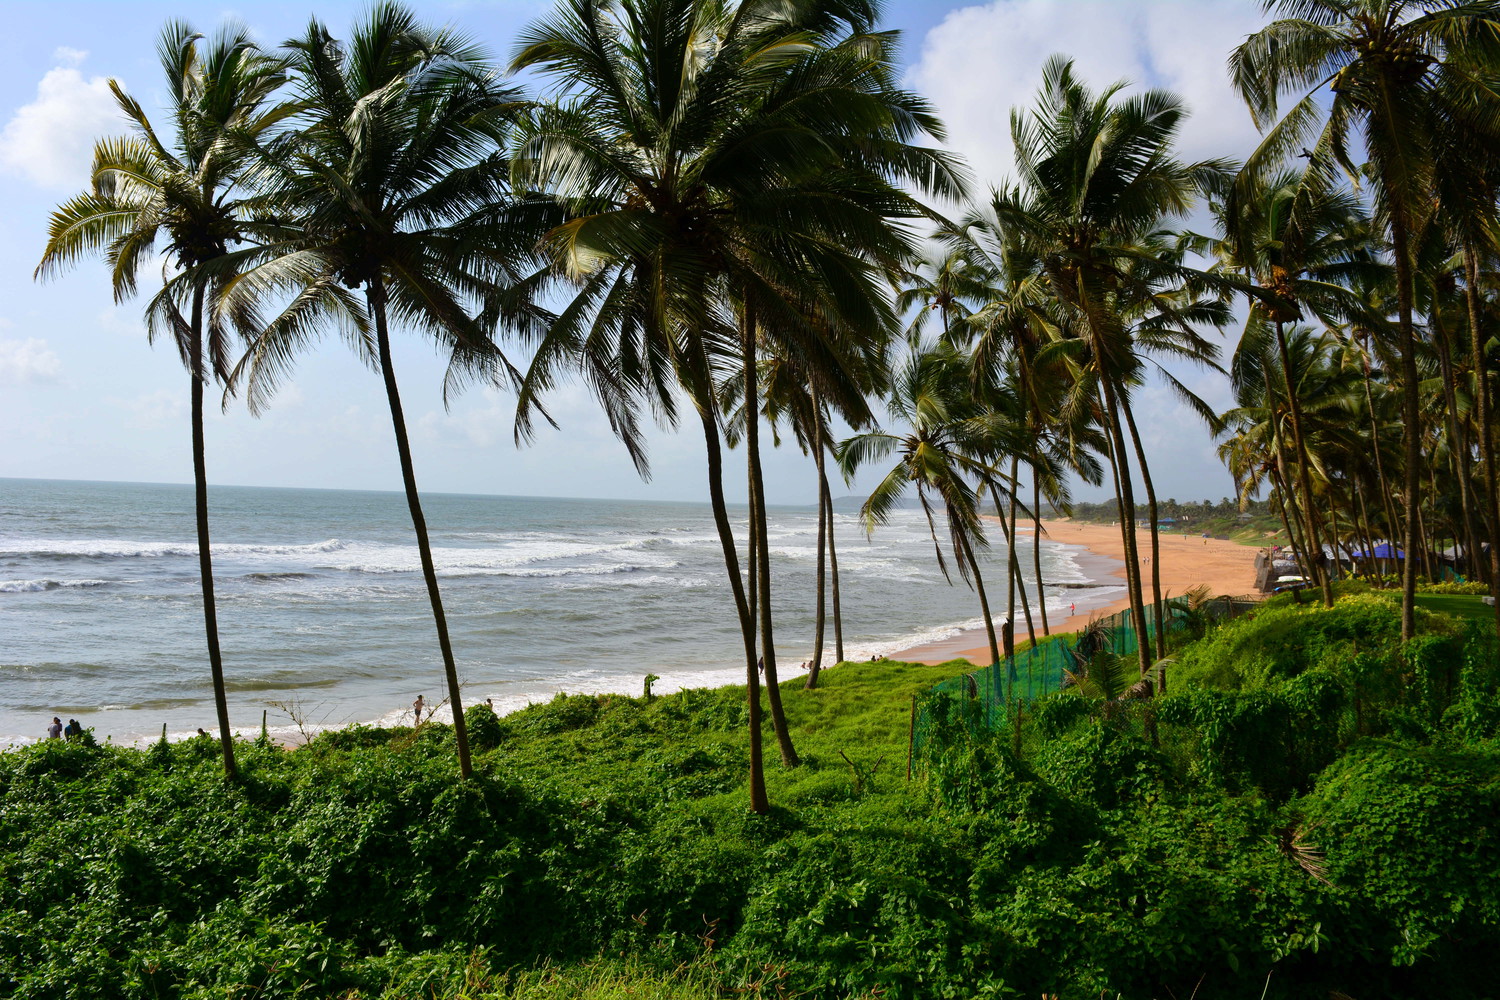 A beach and coconut palm trees